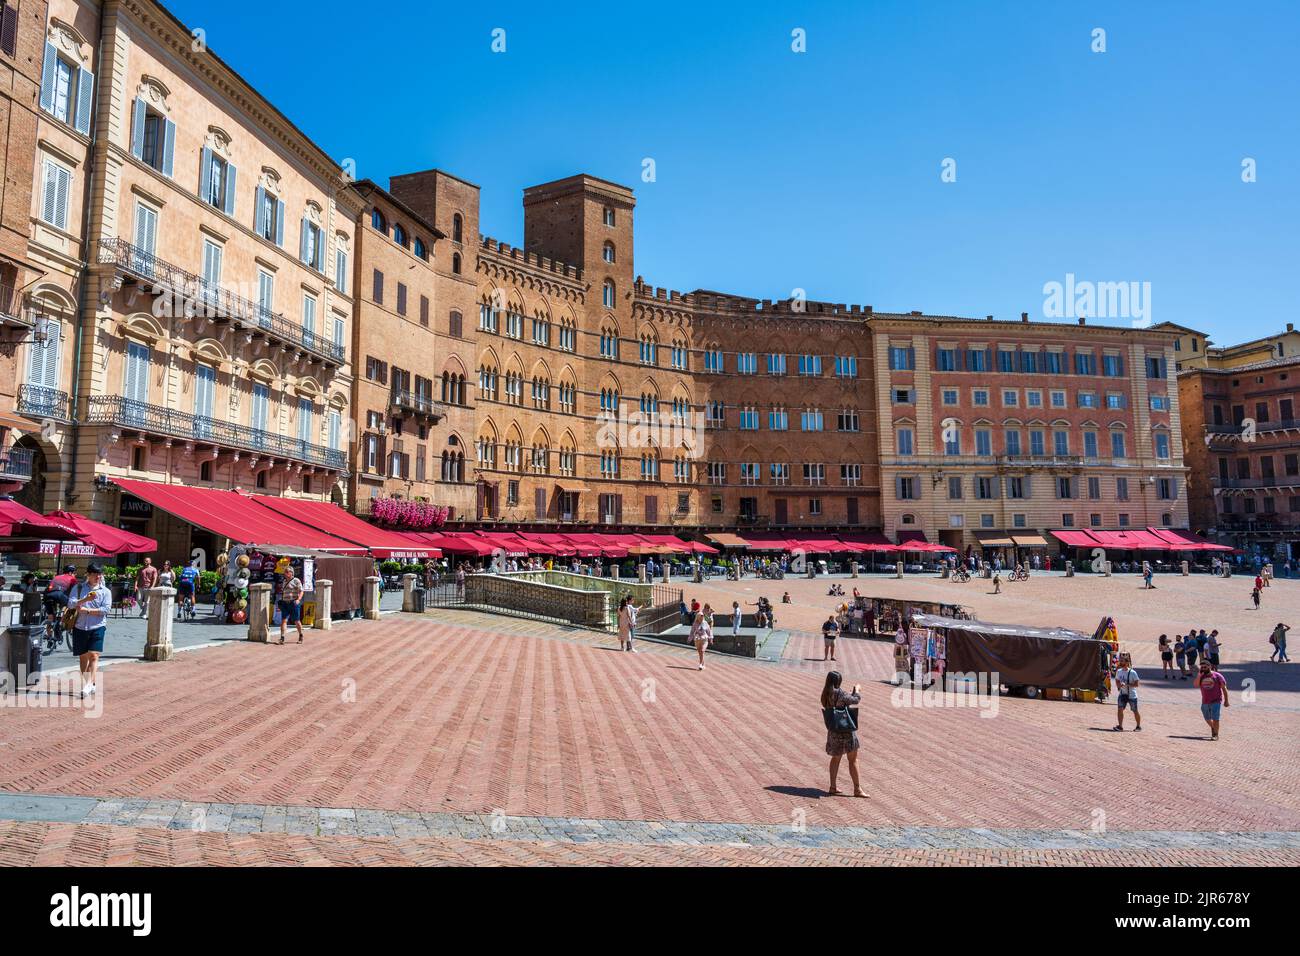 General view of Piazza del Campo in Siena, Tuscany, Italy Stock Photo